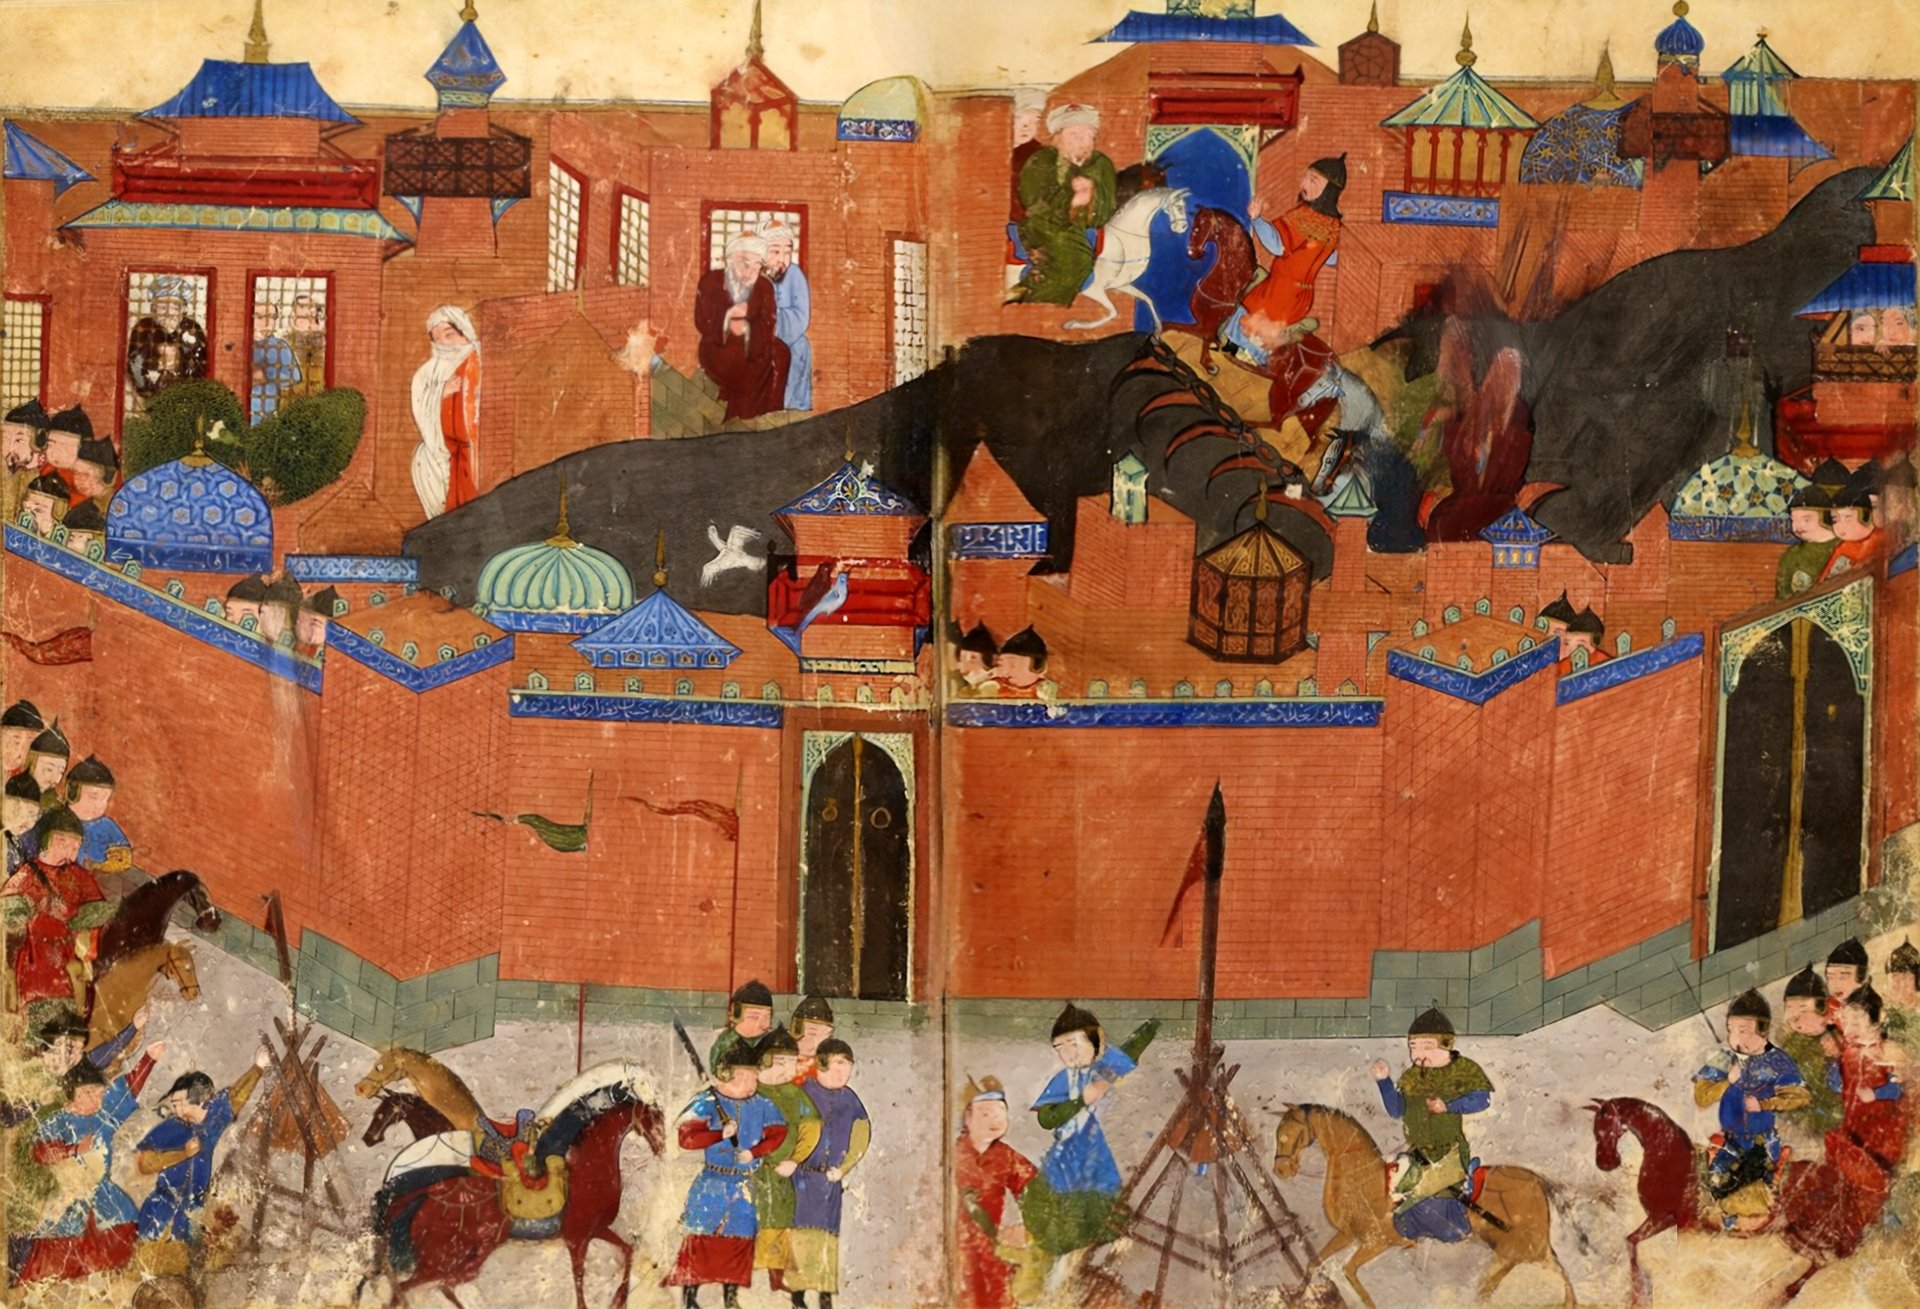 An image of a medieval painting, showing a city of Baghdad with red walls and blue roofs. The city is filled with people, horses, and buildings. Mongolian army is surrounding the city walls.